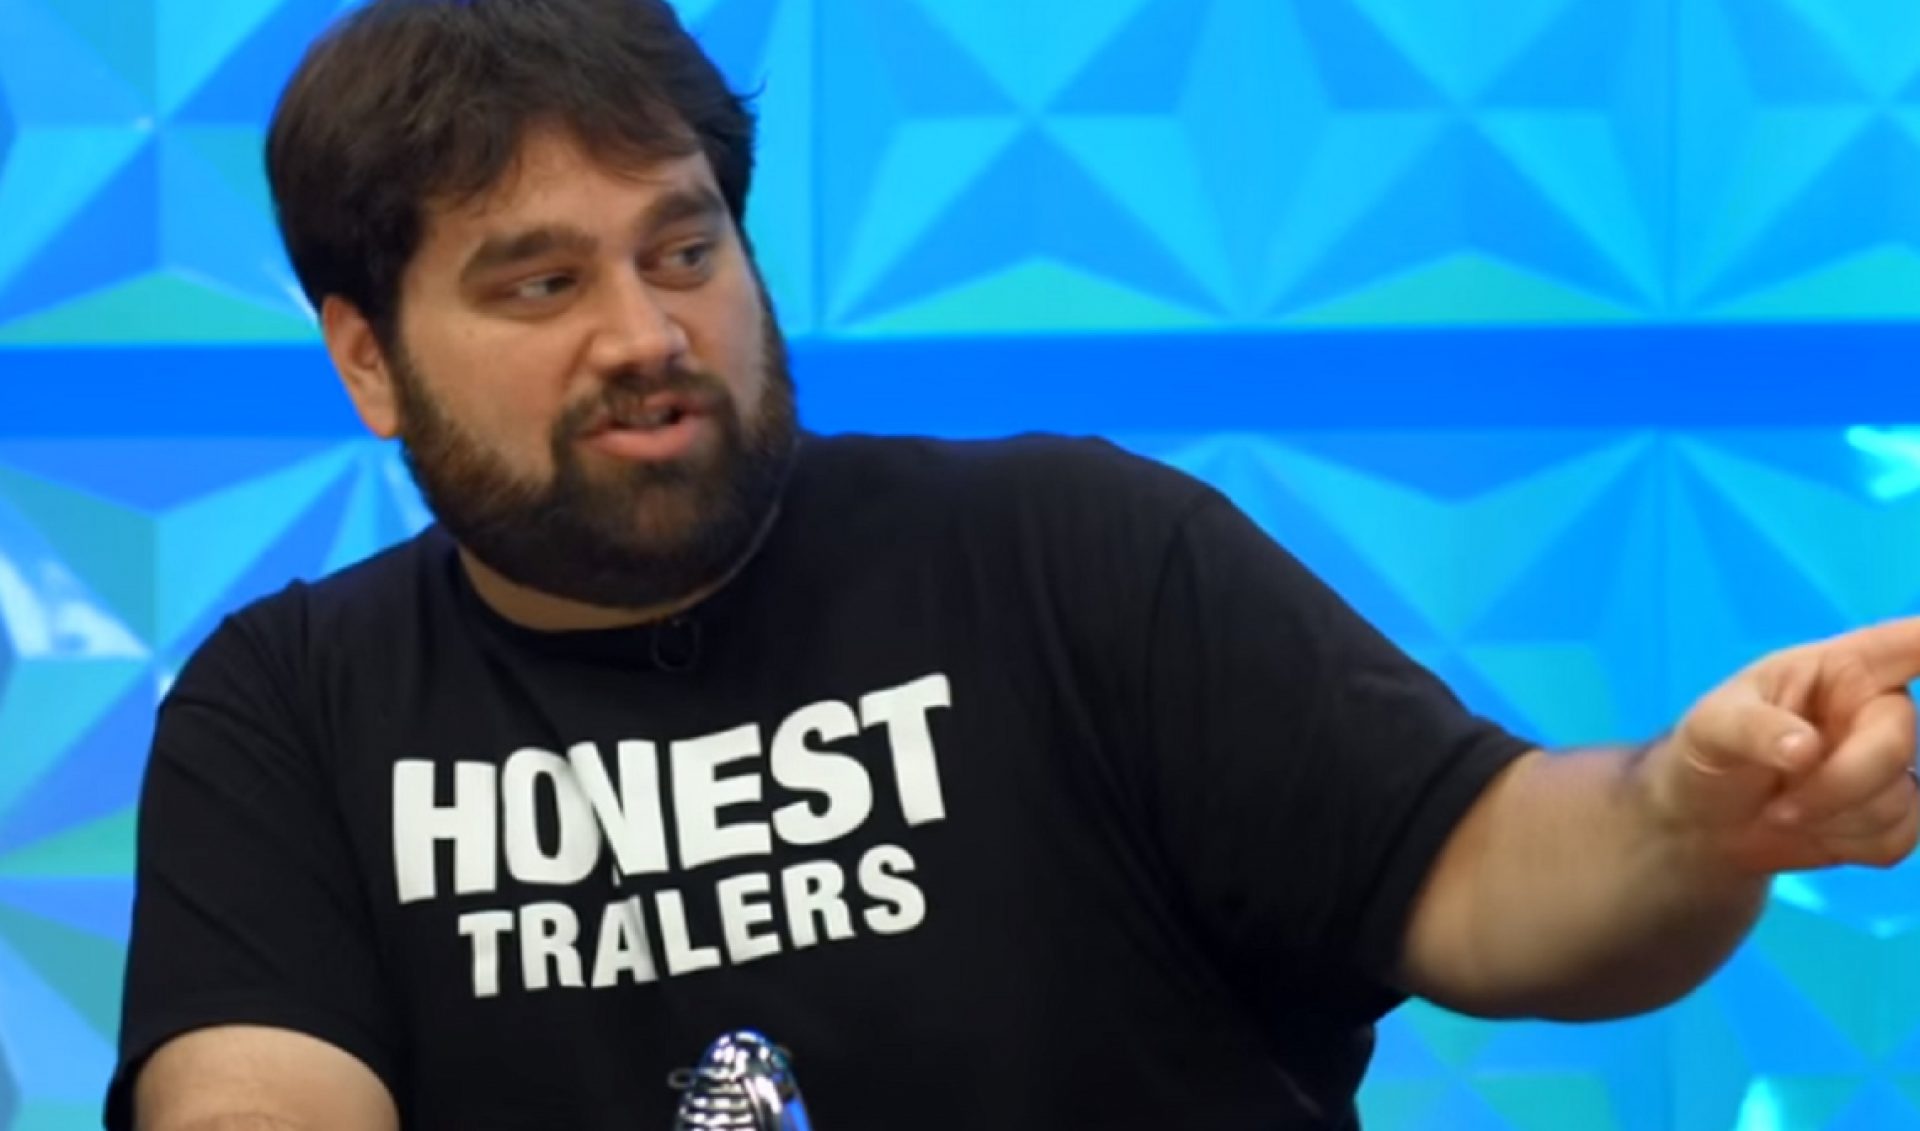 Andy Signore Settles Lawsuit Against Defy Media, Is “Looking Forward To Exposing The Truth”